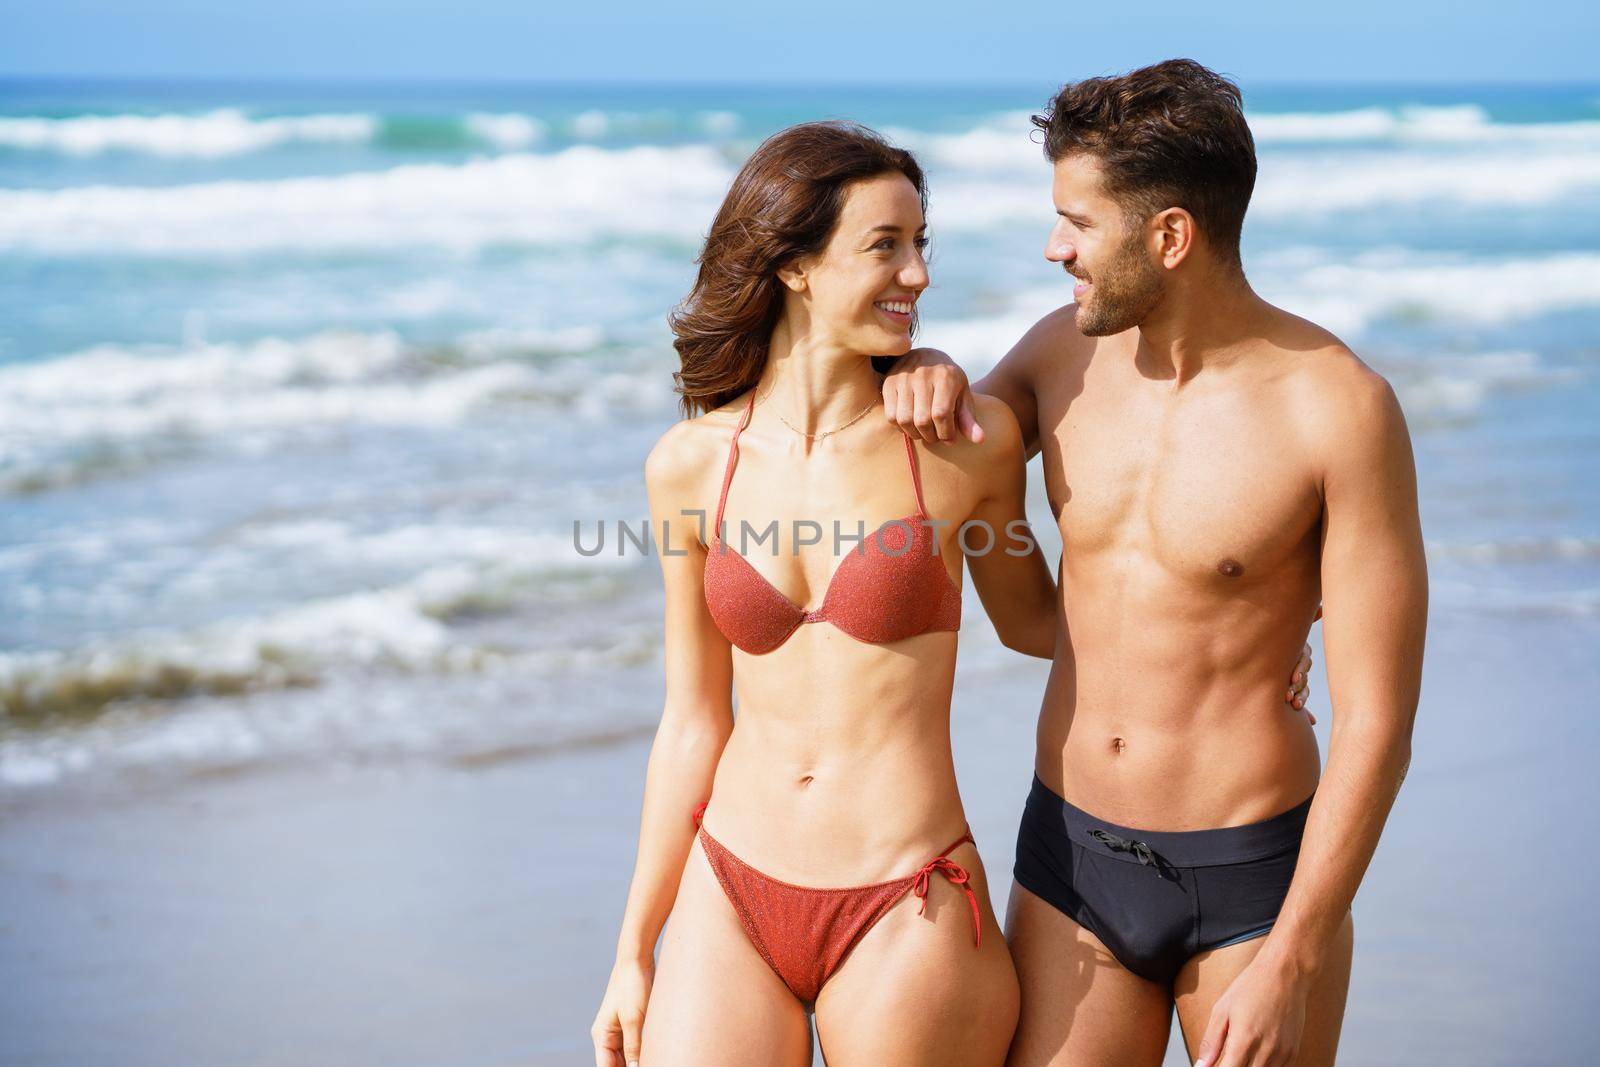 Young couple of beautiful athletic bodies walking together on the beach enjoying their holiday at sea